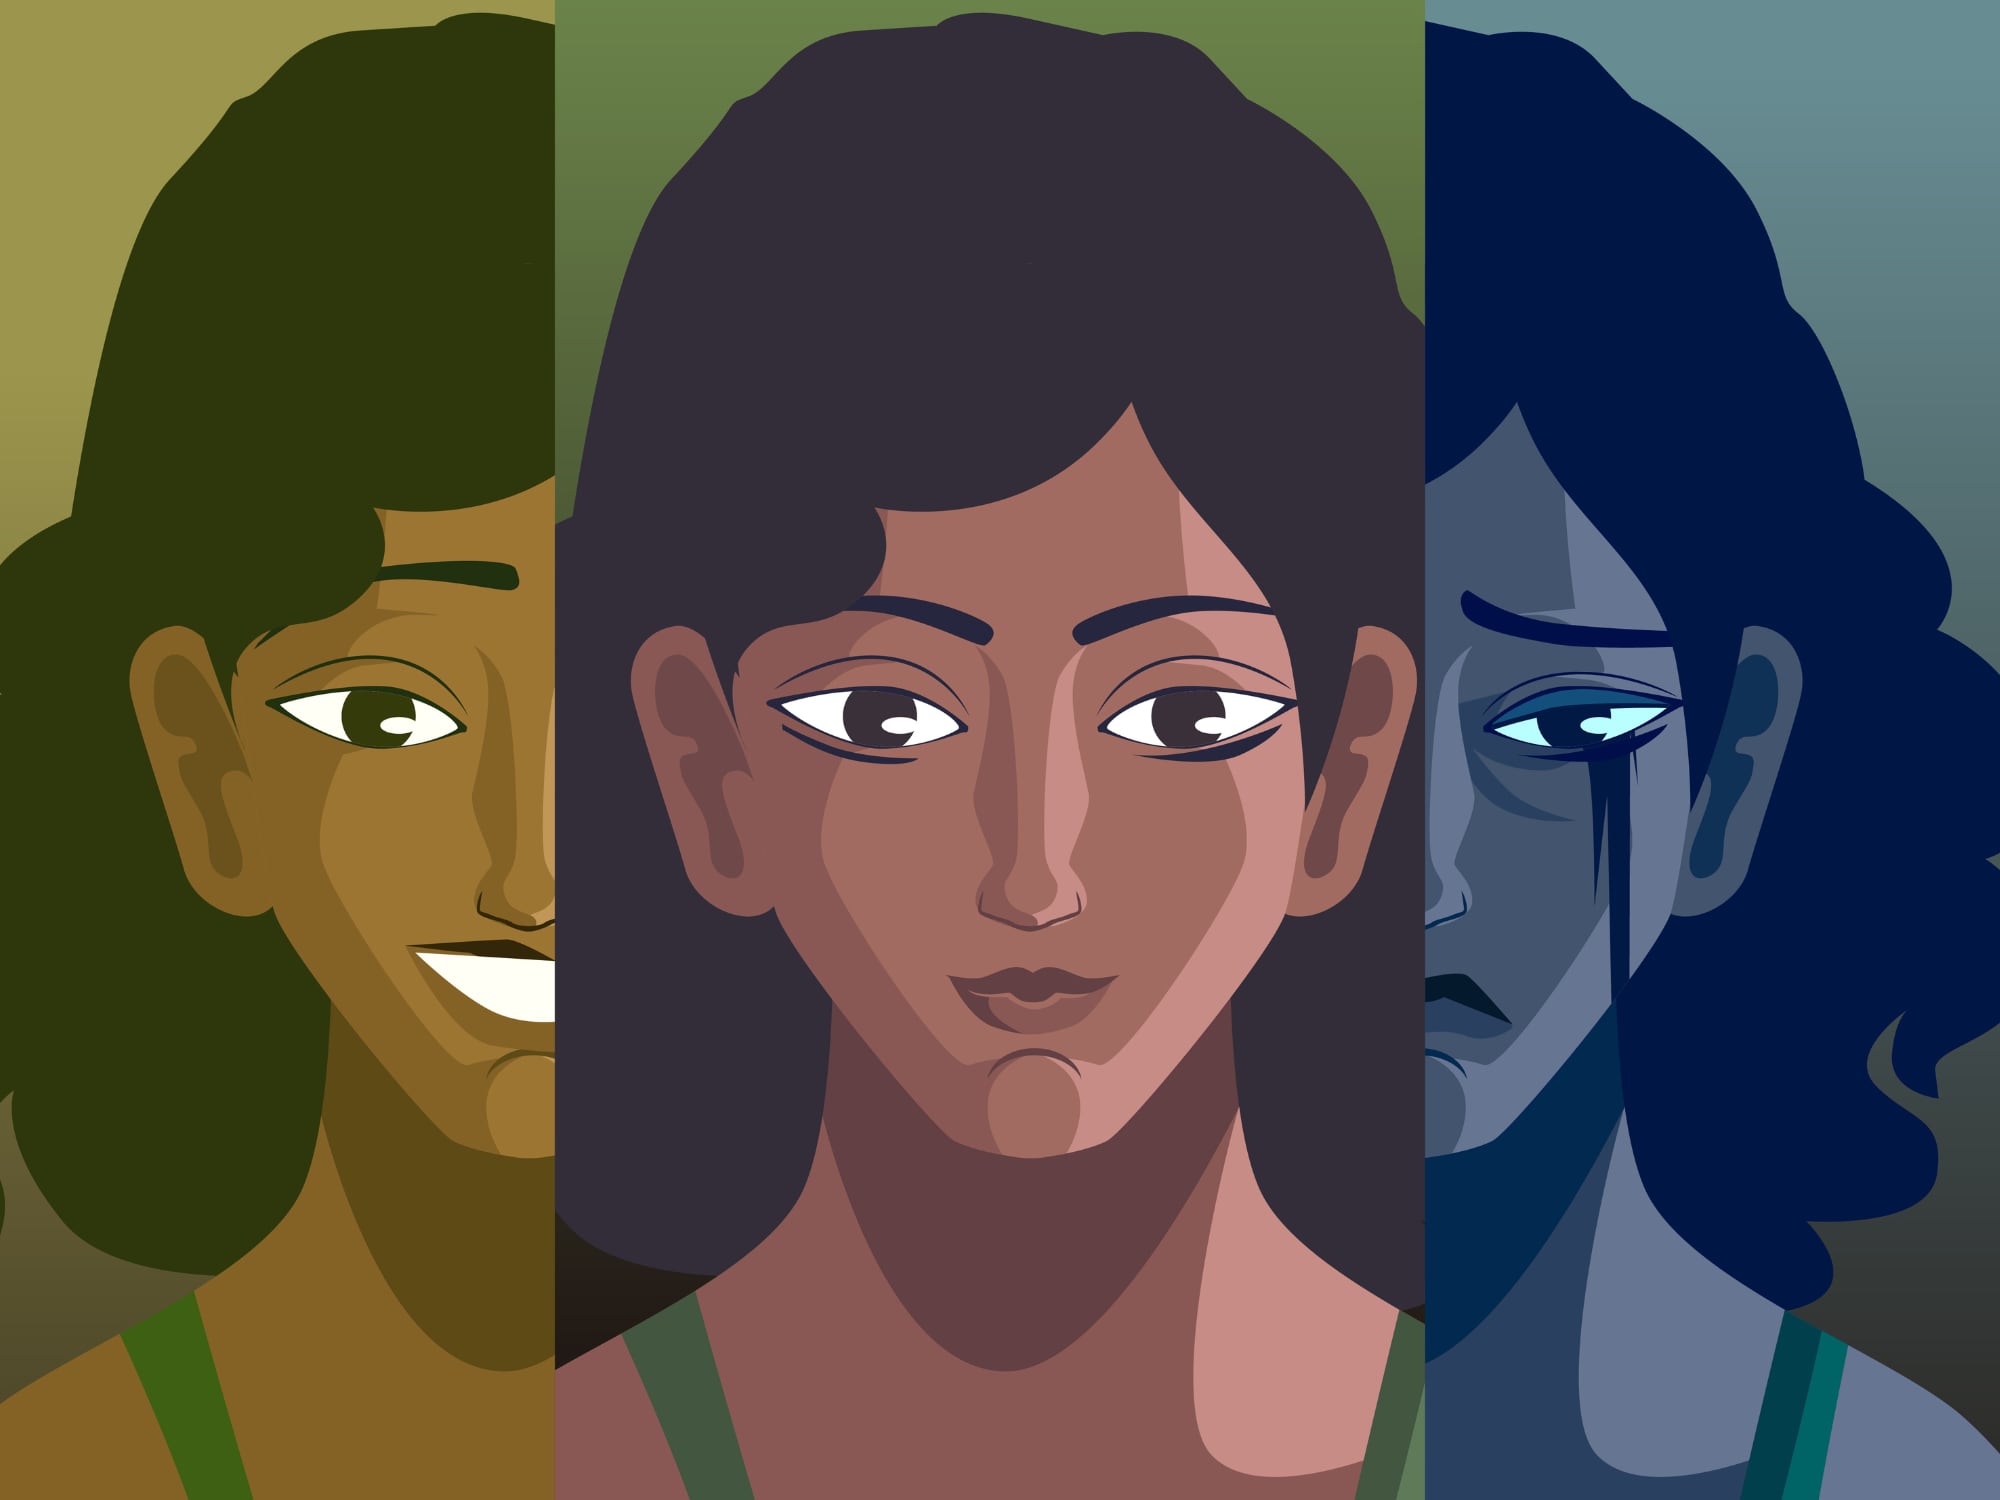 An illustration of a young woman's face showing three separate emotions.